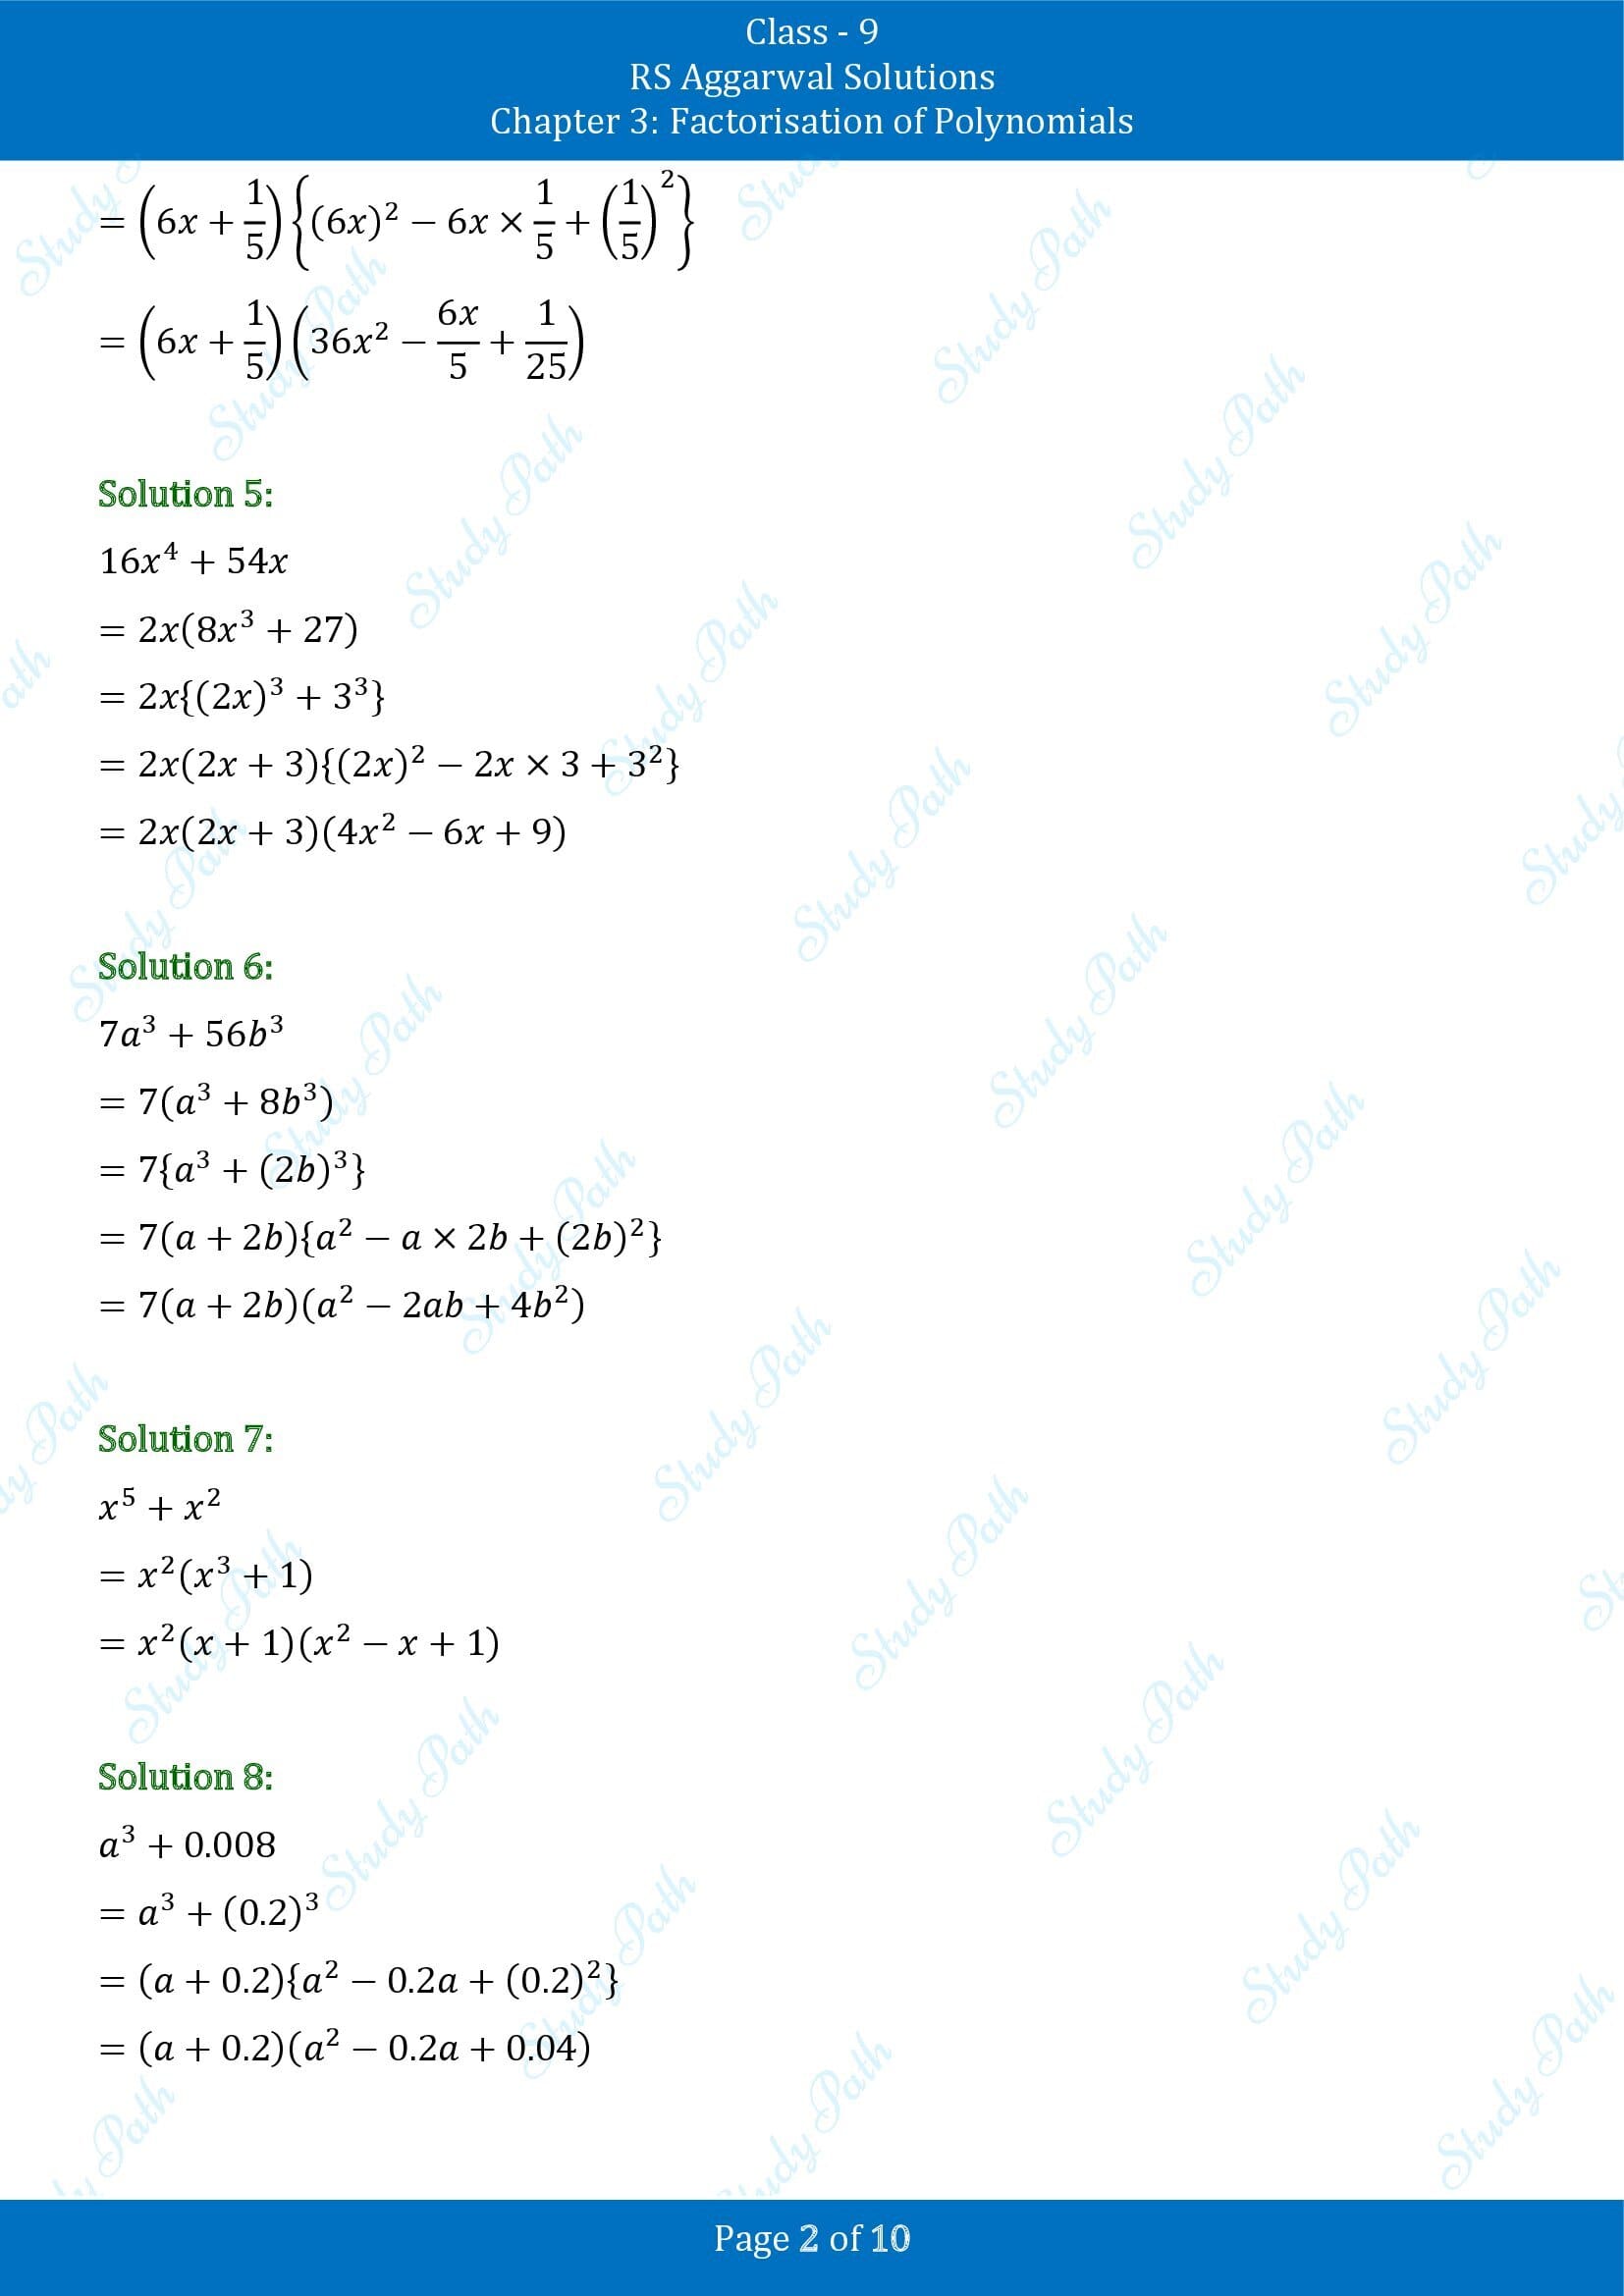 RS Aggarwal Solutions Class 9 Chapter 3 Factorisation of Polynomials Exercise 3F 00002